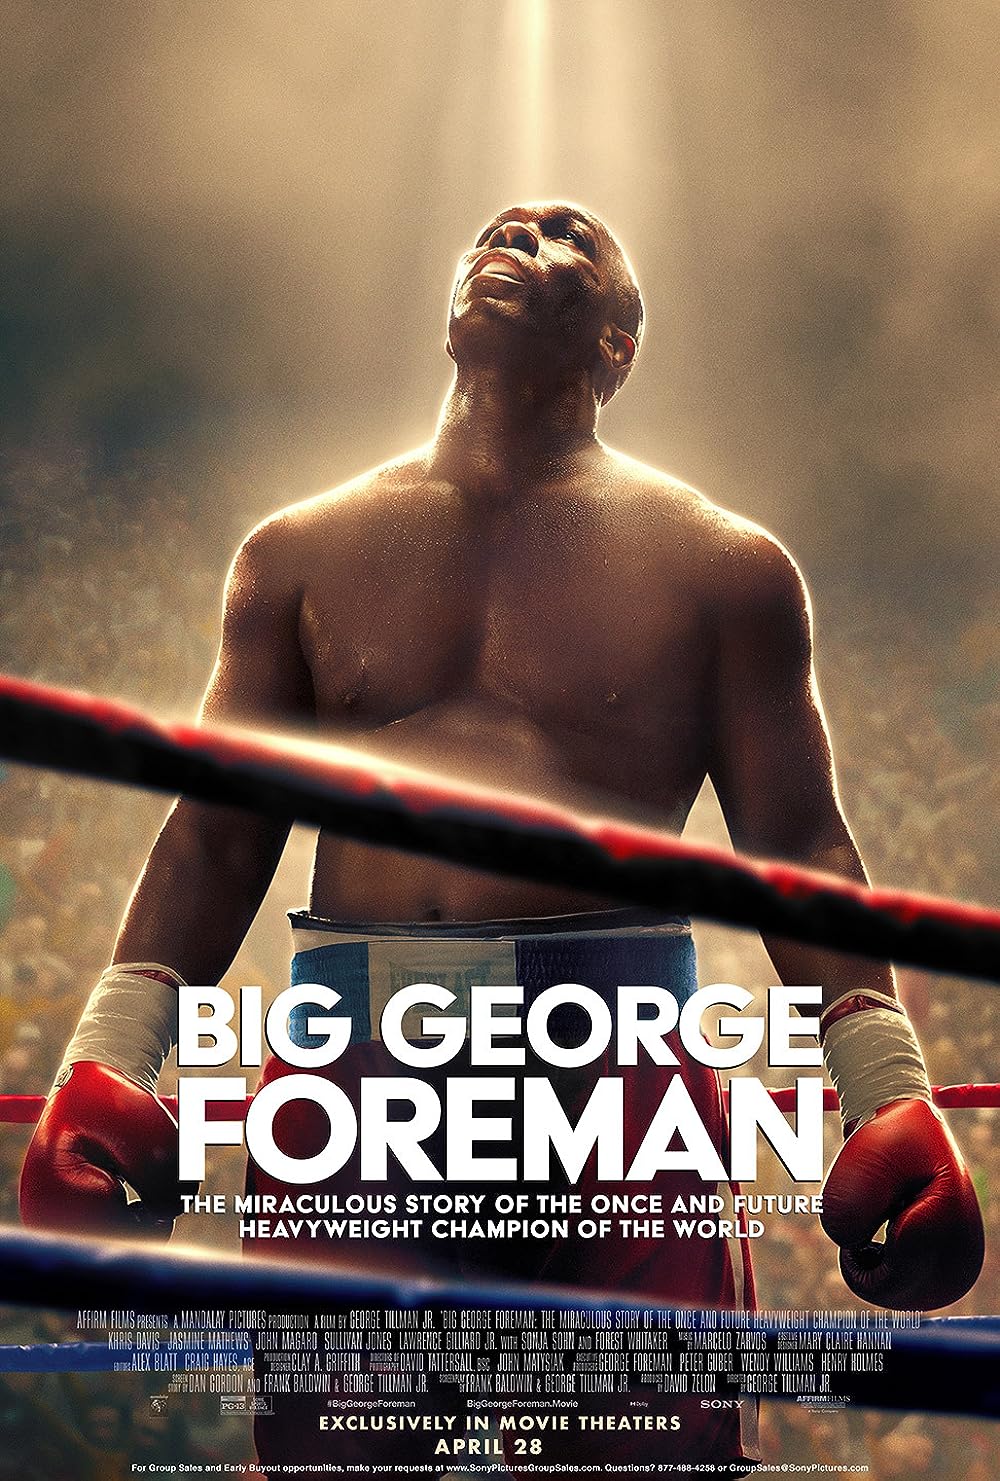 Cover Art for "Big George Foreman"